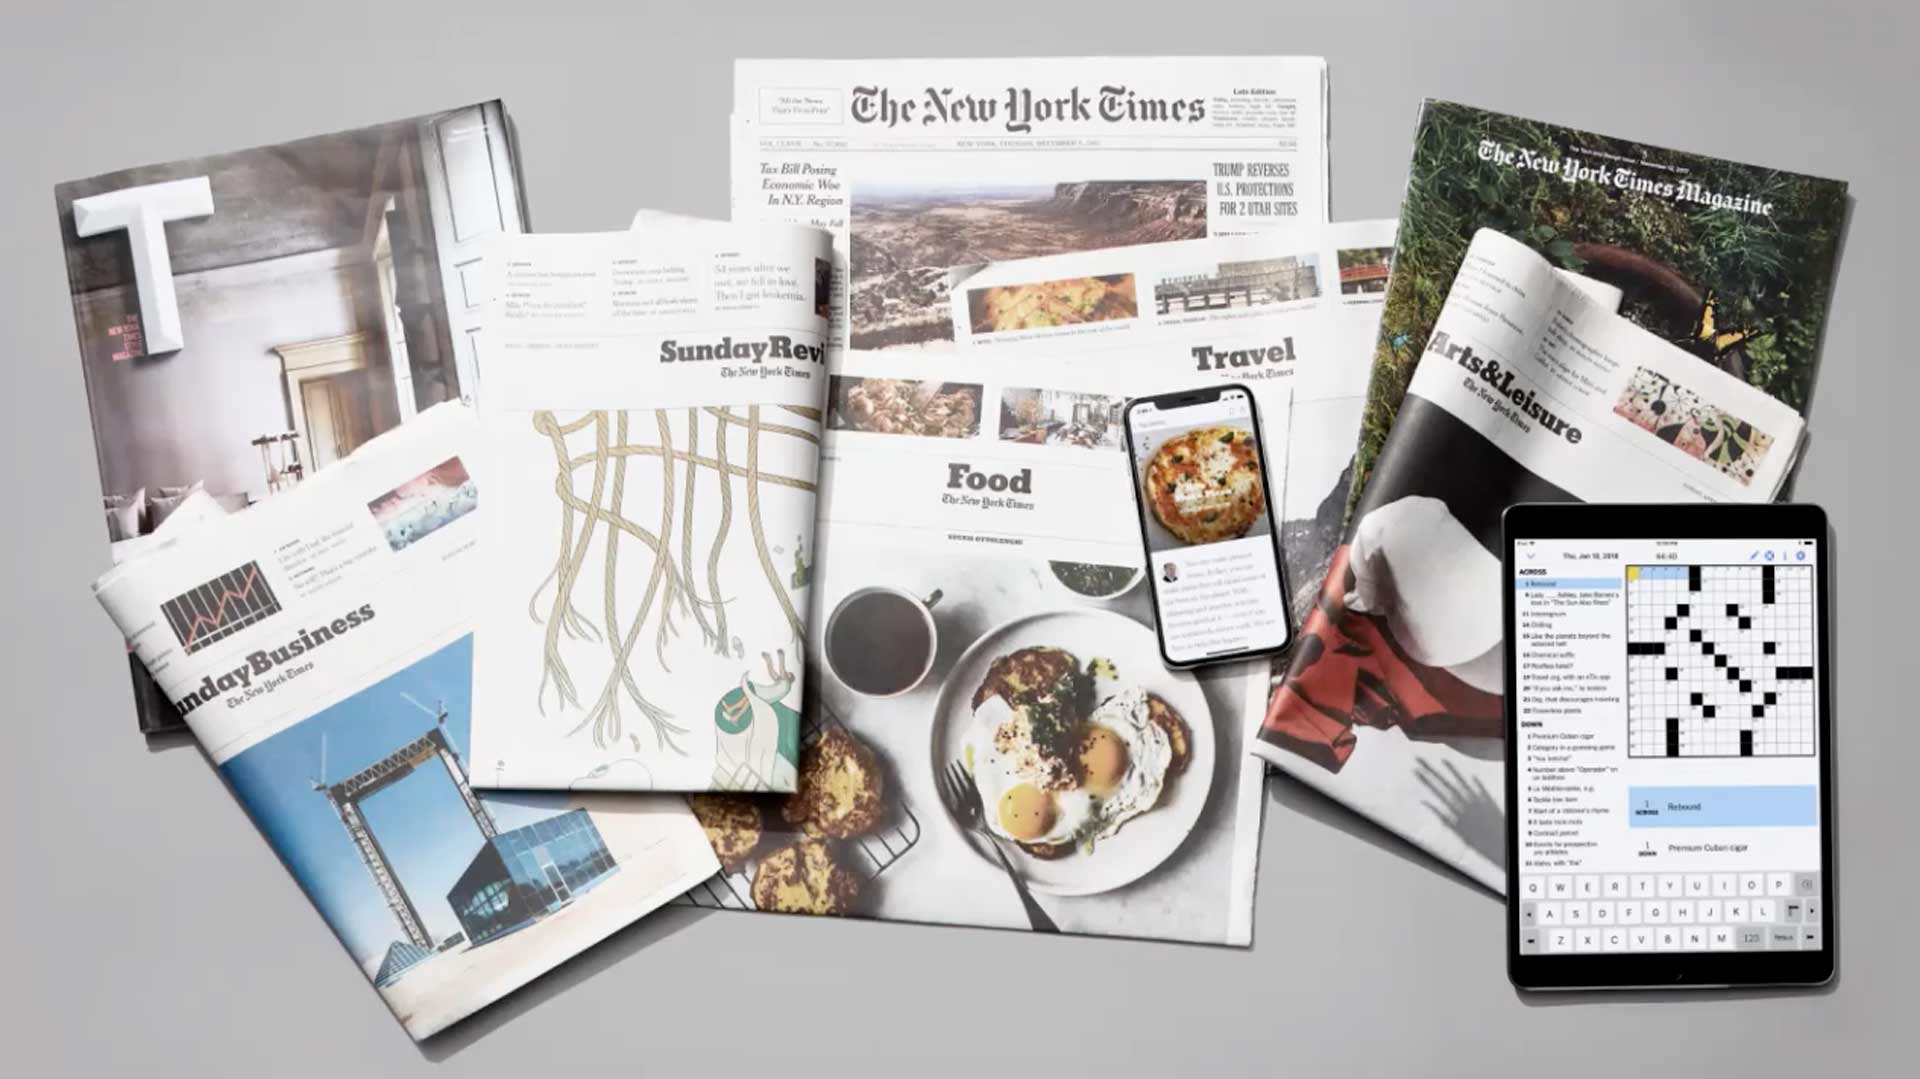 collection of magazines and newspapers from New York times